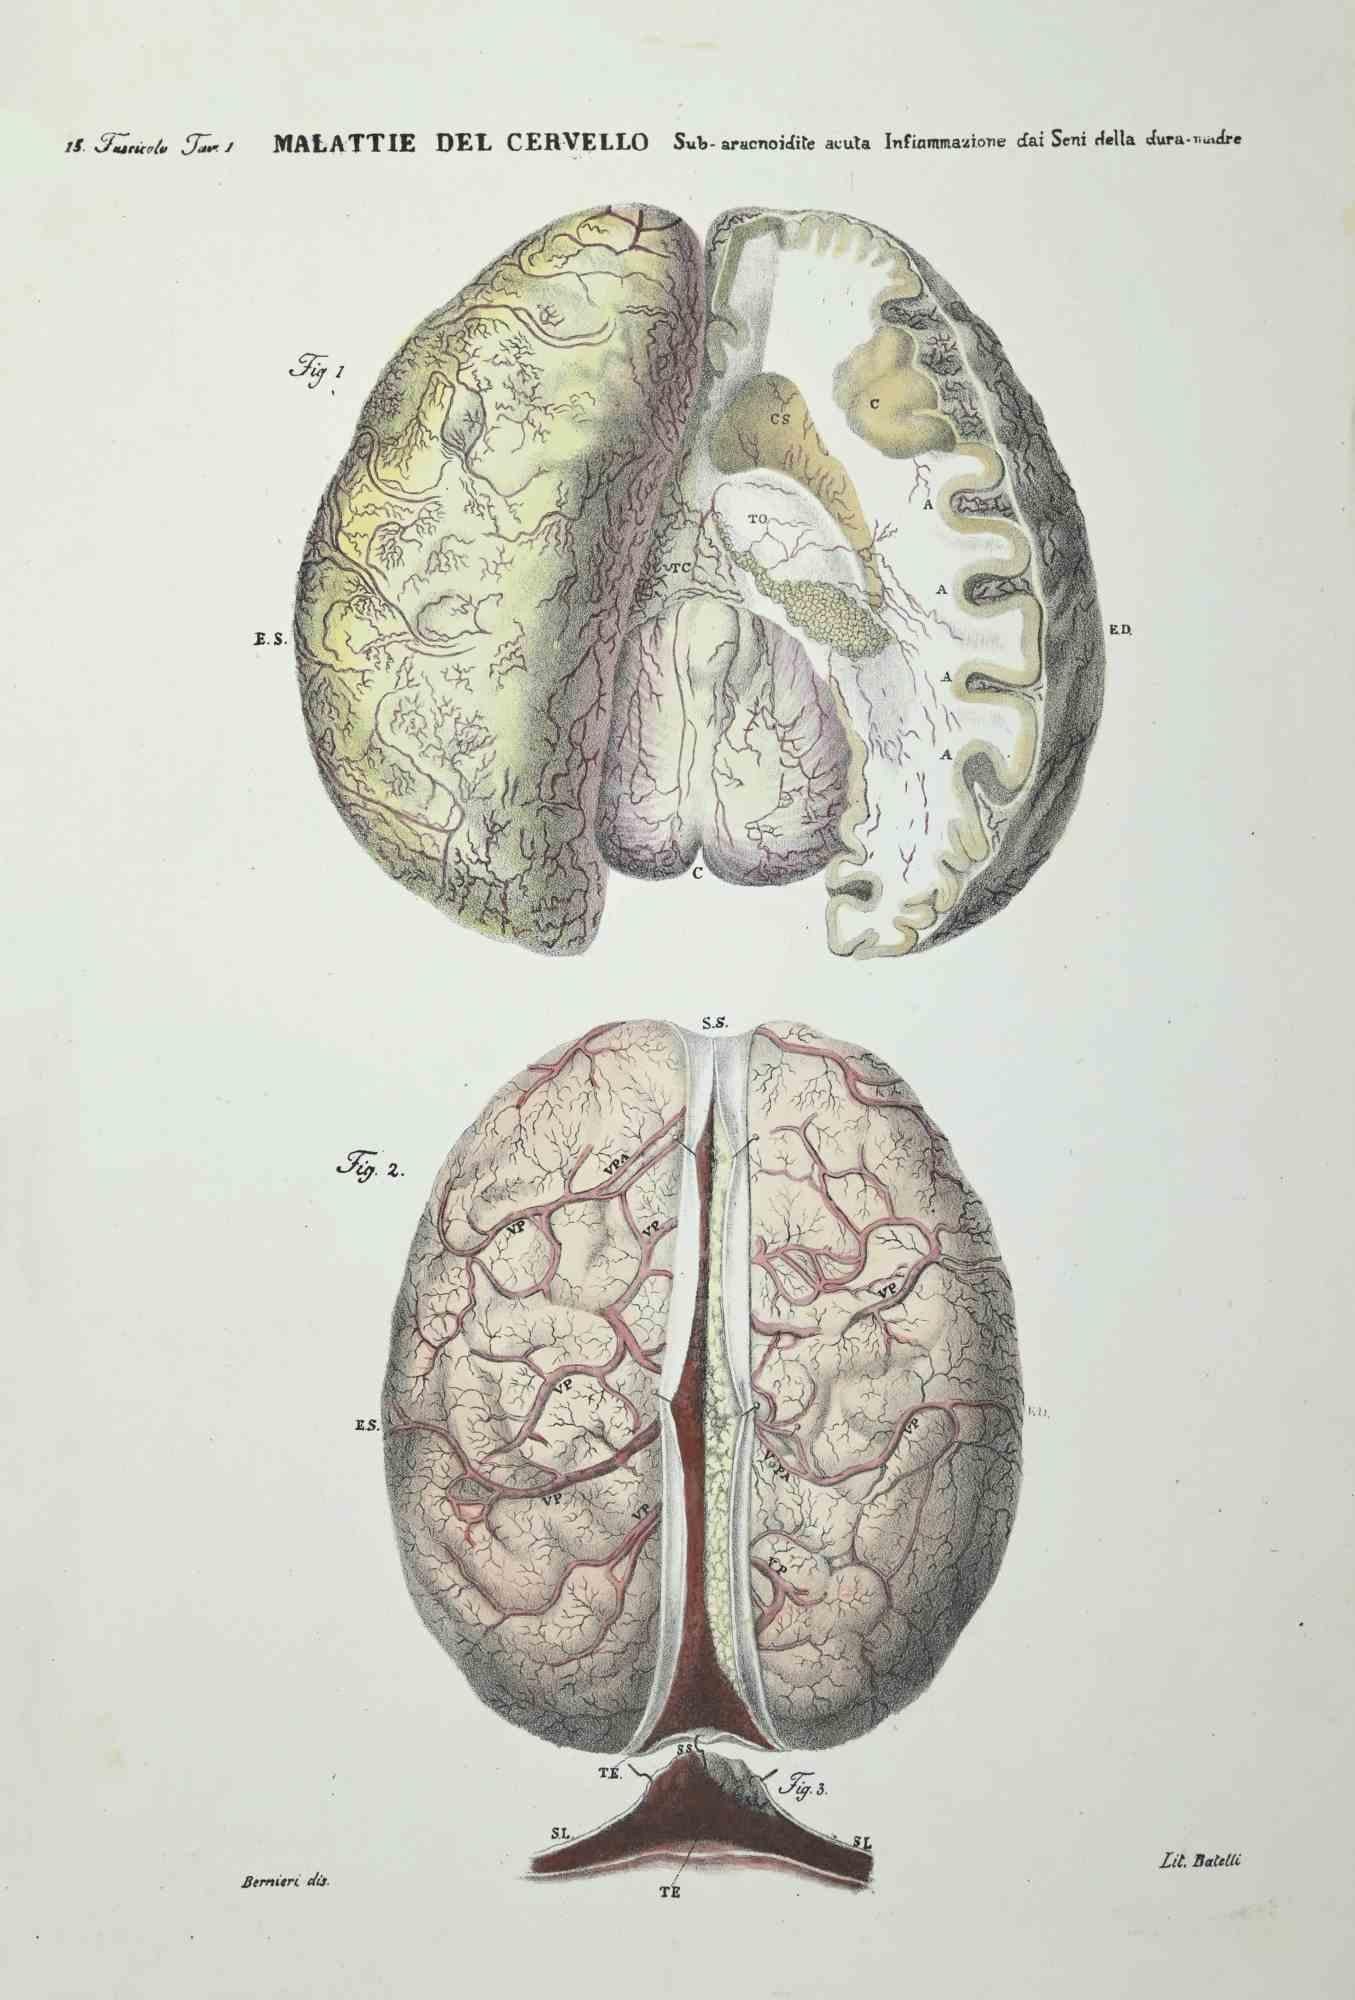 Brain Diseases is a lithograph hand colored by Ottavio Muzzi for the edition of Antoine Chazal, Human Anatomy, Printers Batelli and Ridolfi, realized in 1843.

Signed on plate on the left corner.

The artwork belongs to the "Atlante Generale della